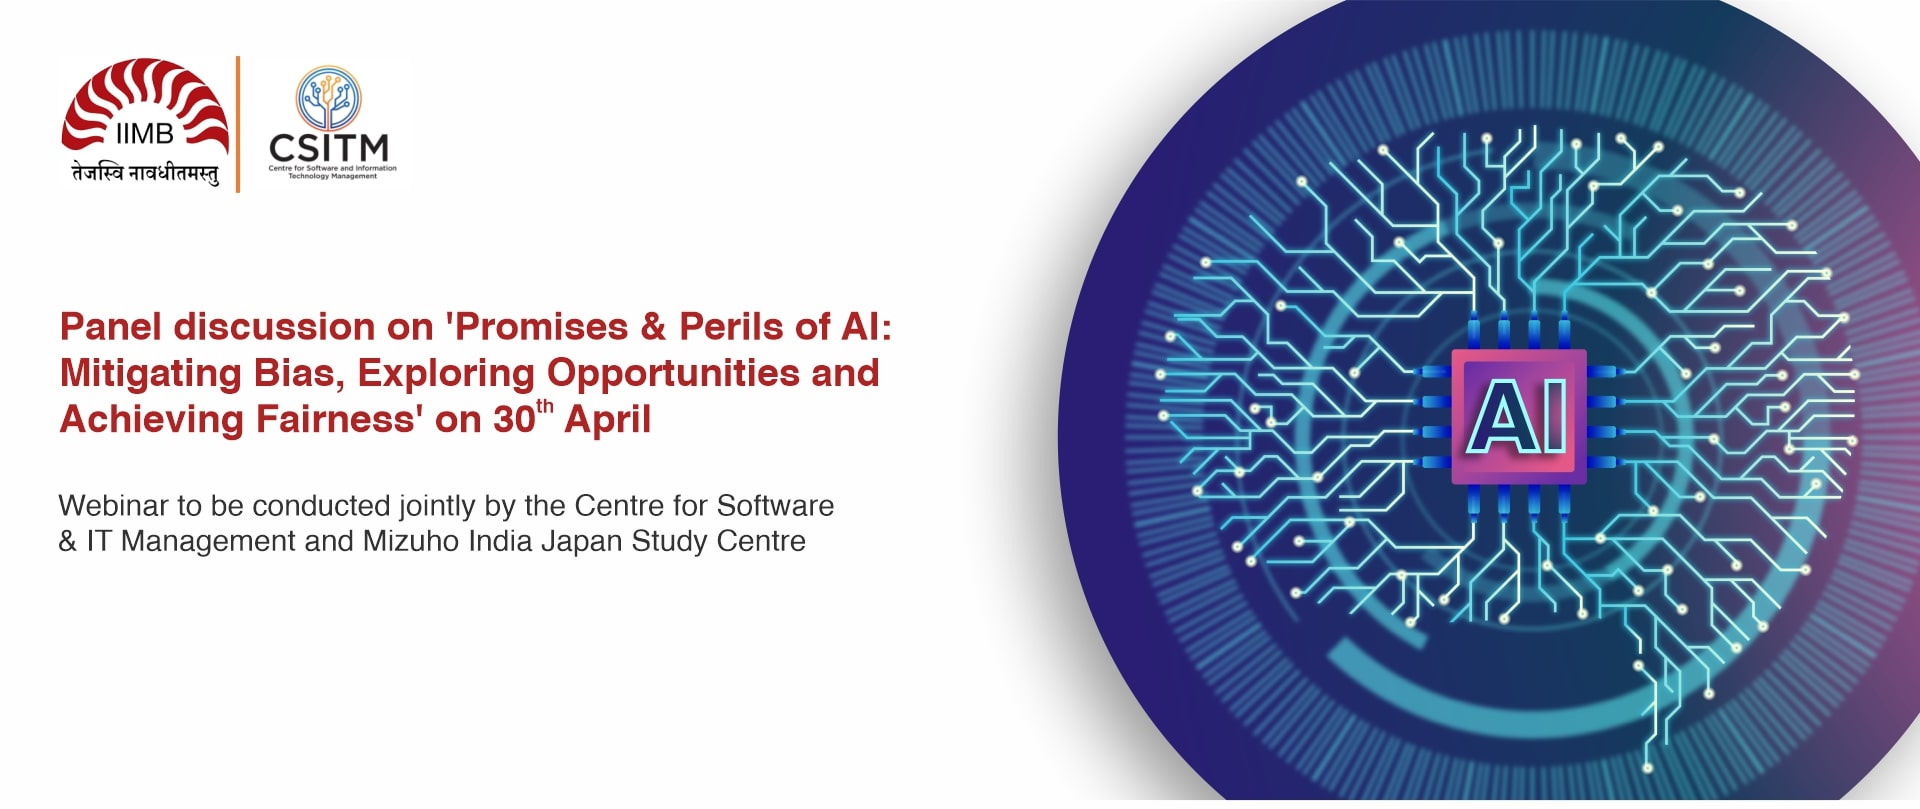 Panel discussion on ‘Promises & Perils of AI: Mitigating Bias, Exploring Opportunities and Achieving Fairness’ on 30th April 